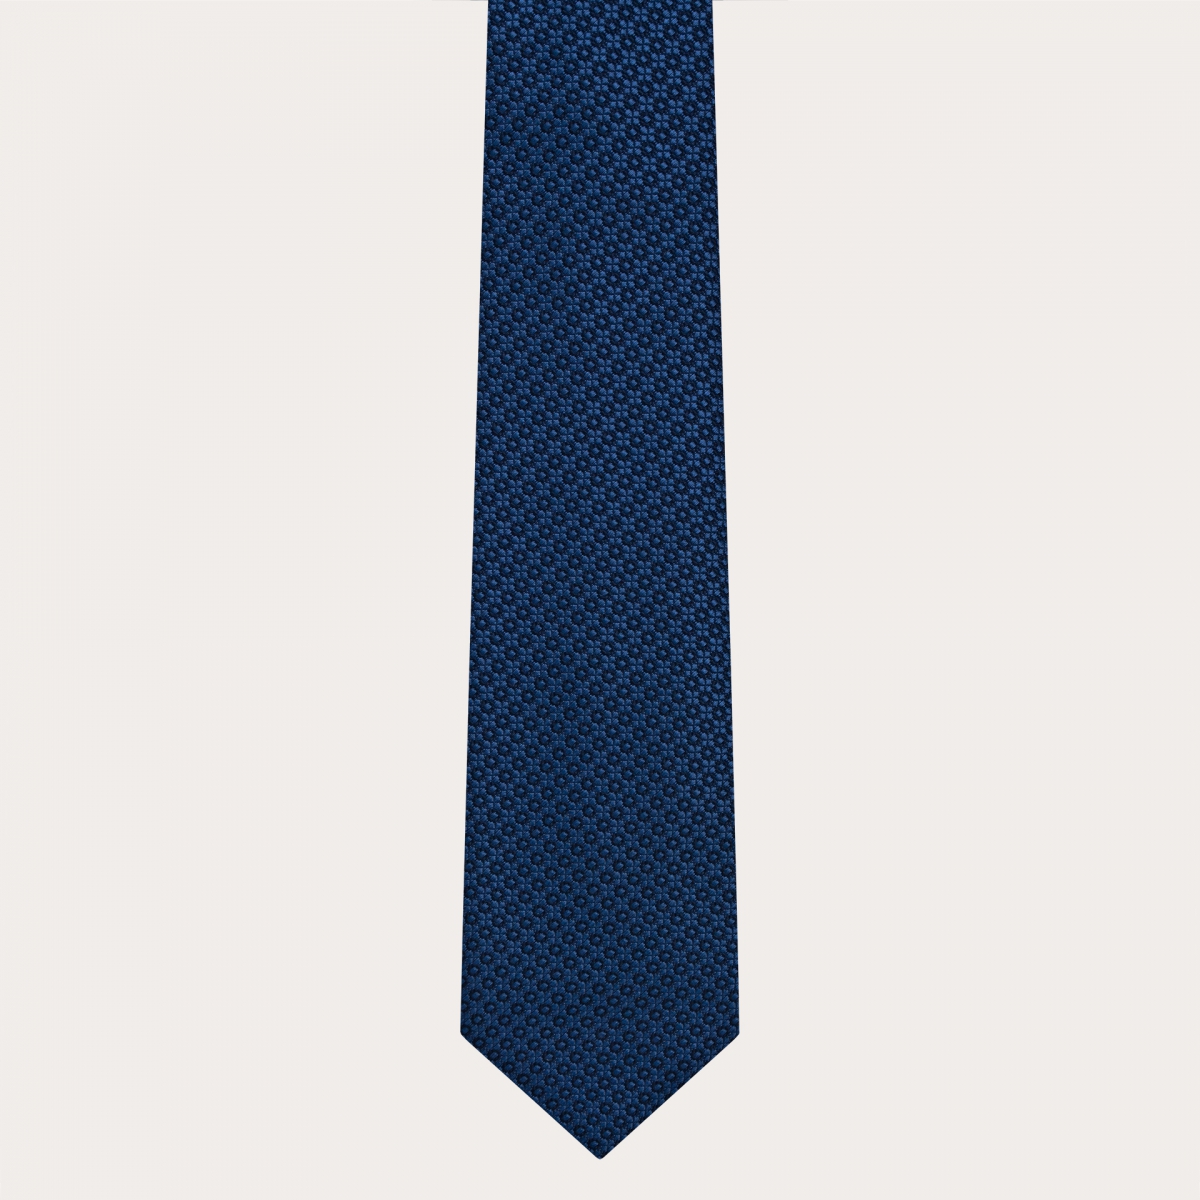 Jacquard silk tie, blue with tone-on-tone floral pattern